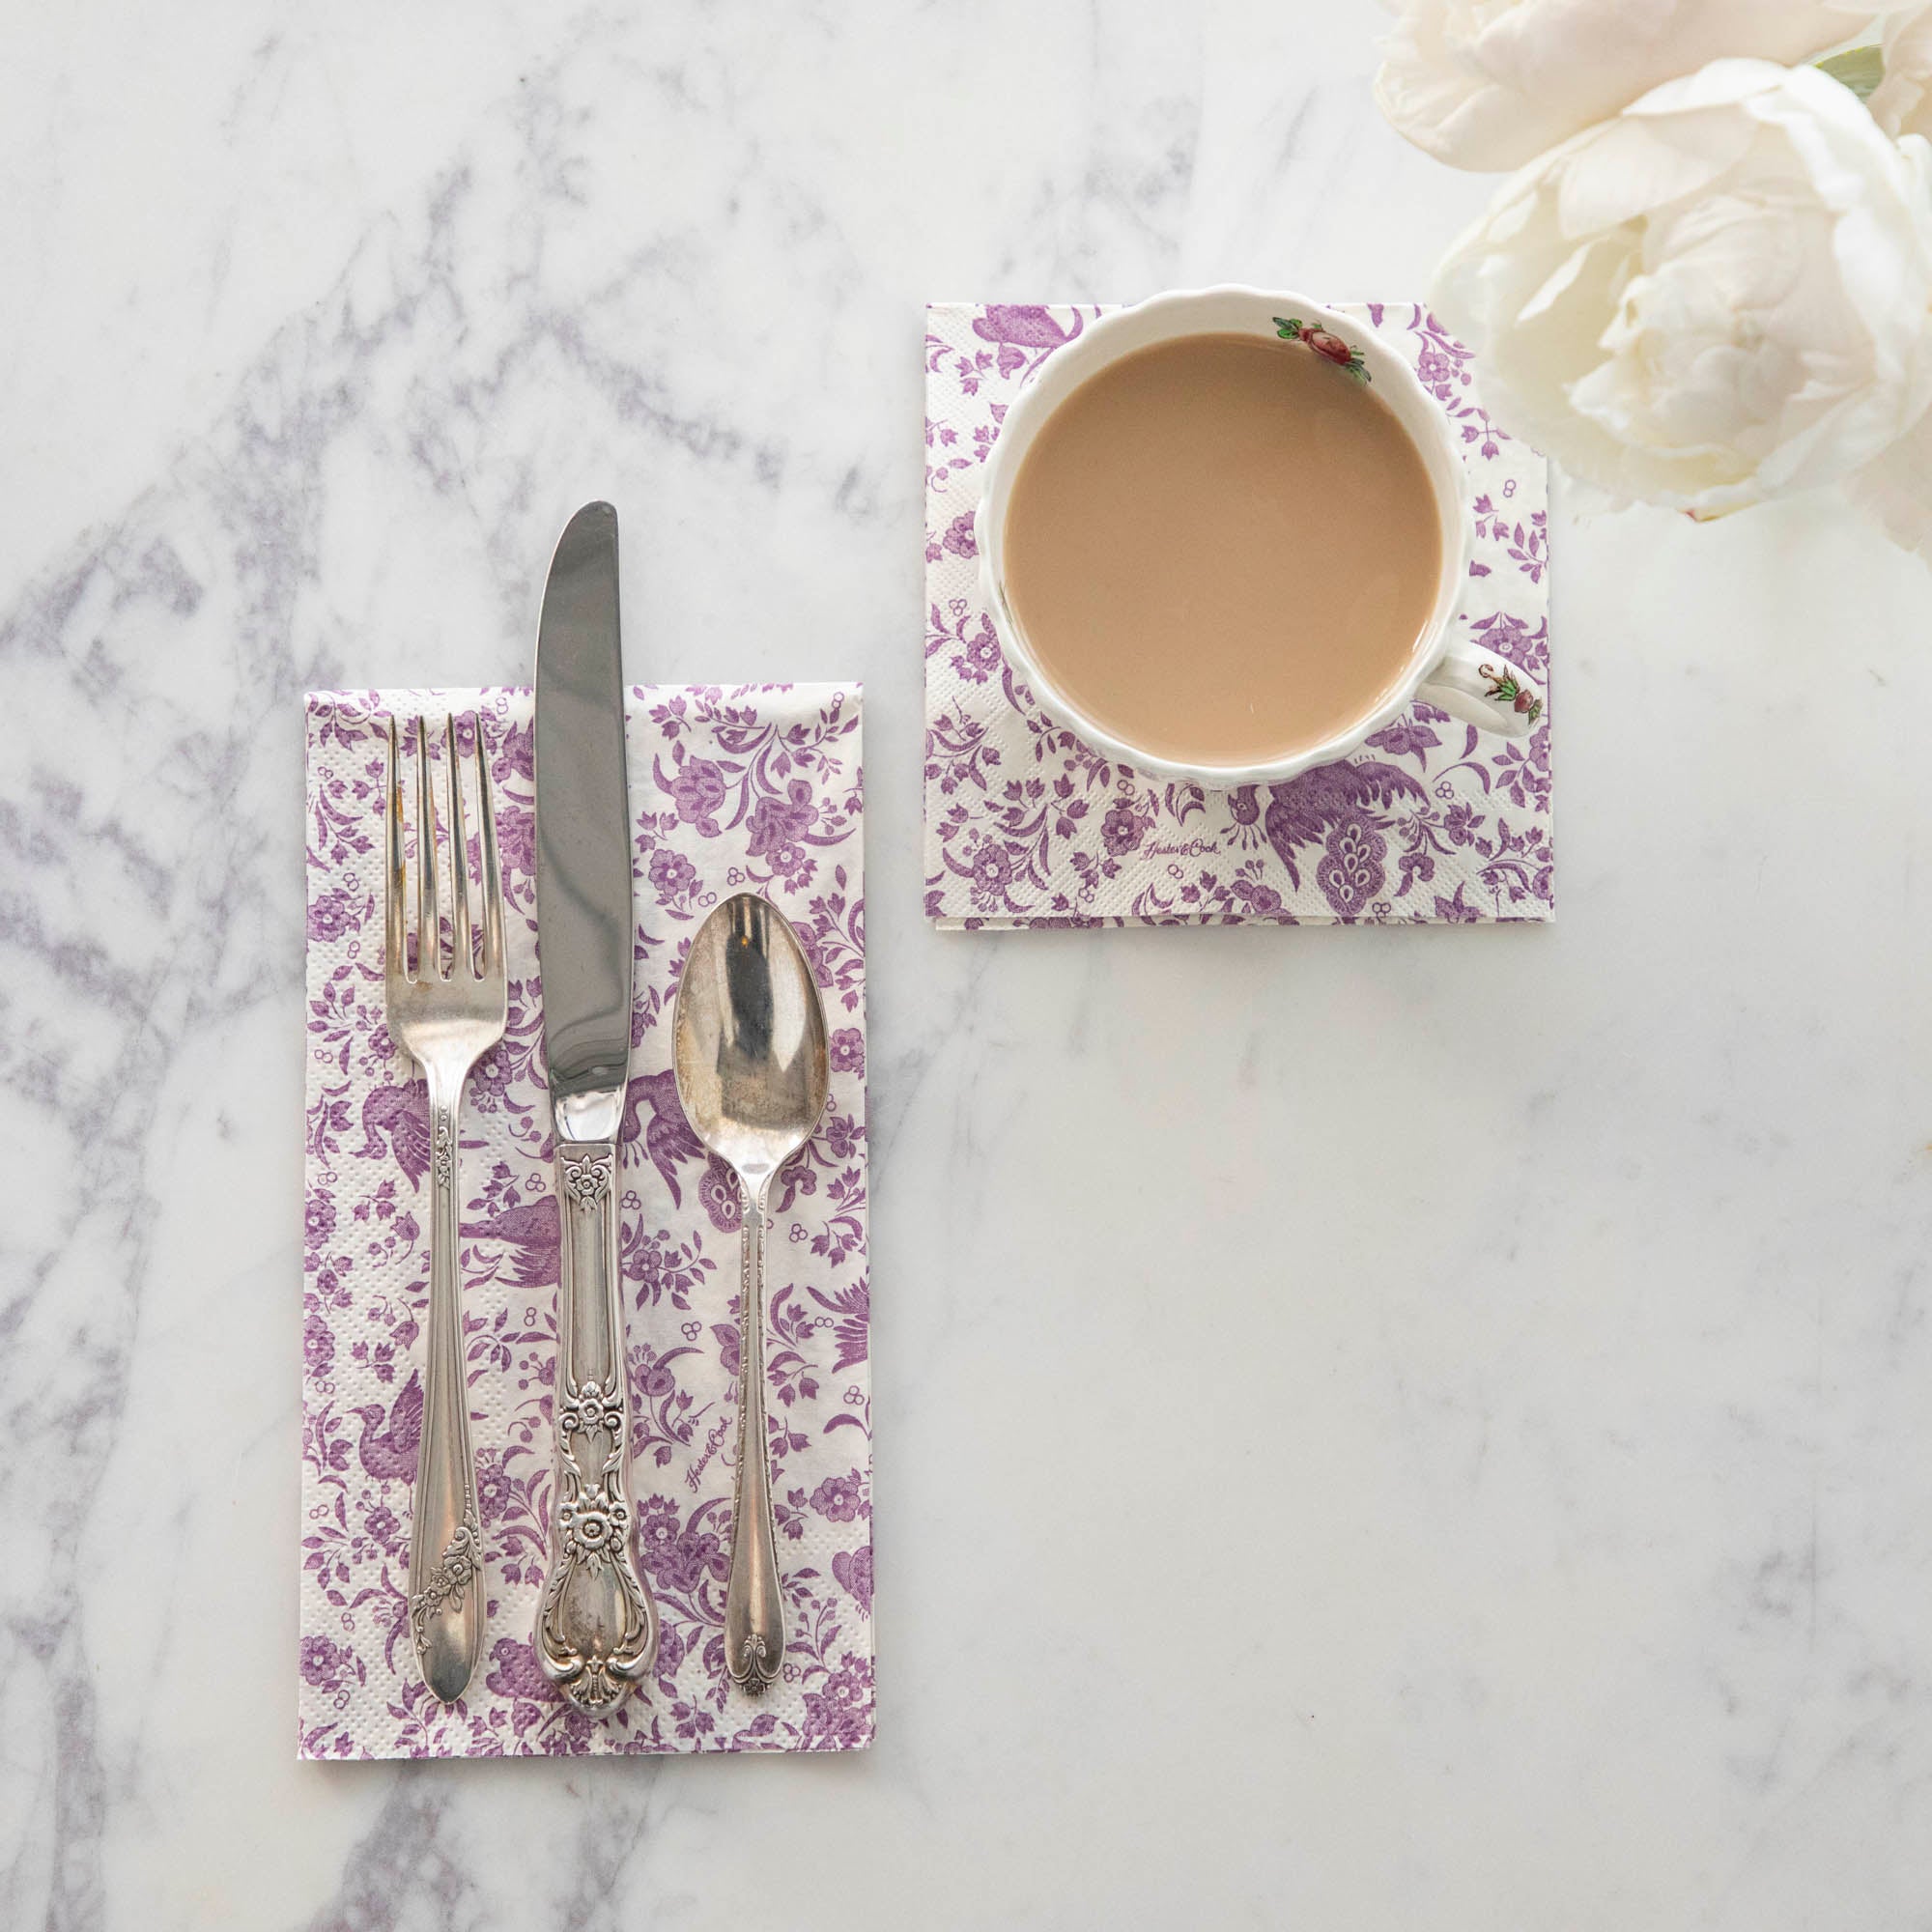 A top-down view of a set of cutlery on a Lilac Regal Peacock Guest Napkin next to a cup of coffee on a Lilac Regal Peacock Cocktail Napkin.